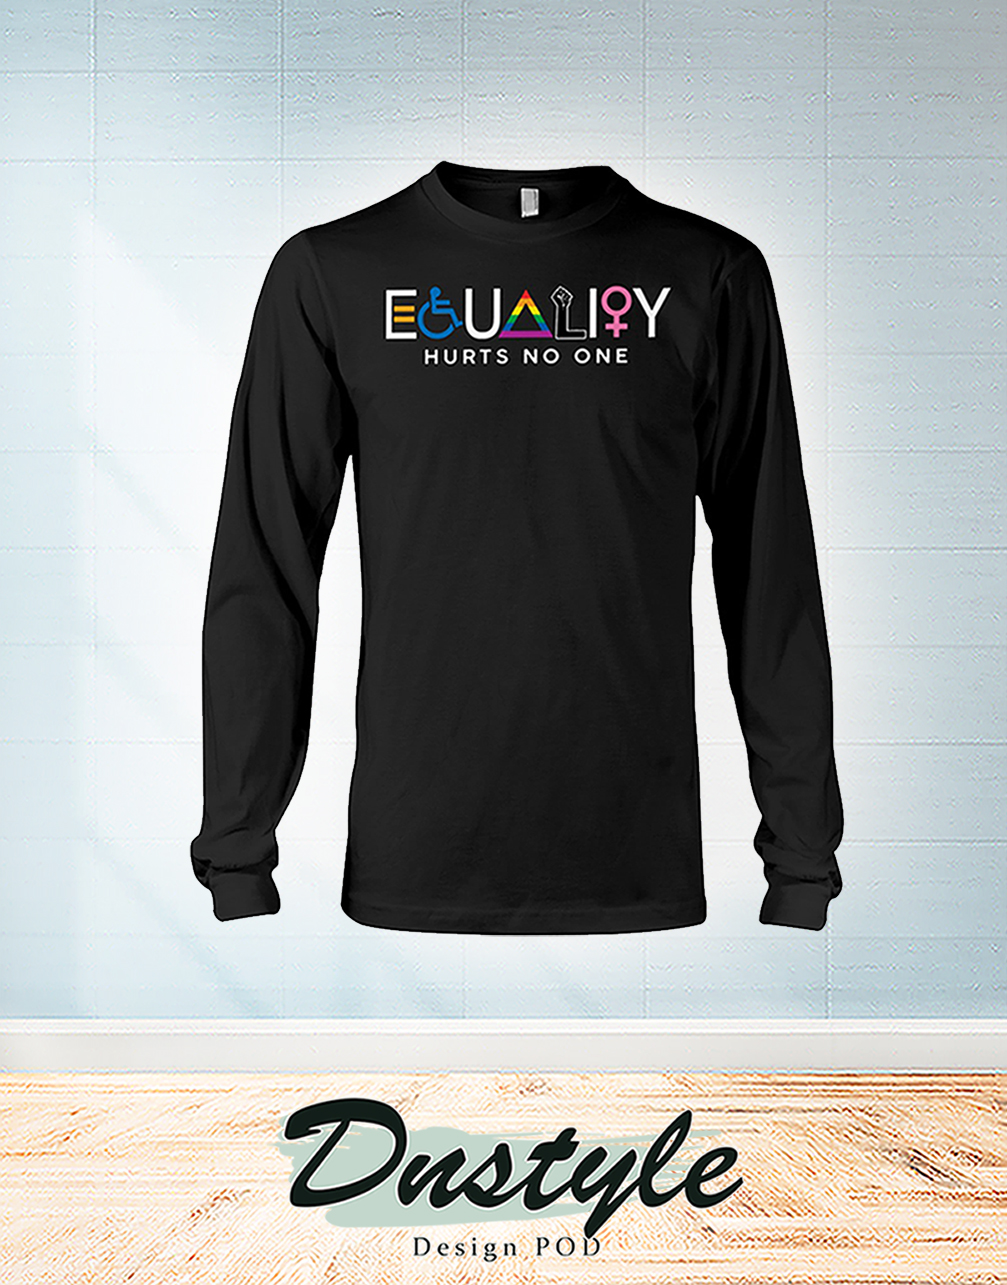 Equality hurts no one long sleeve